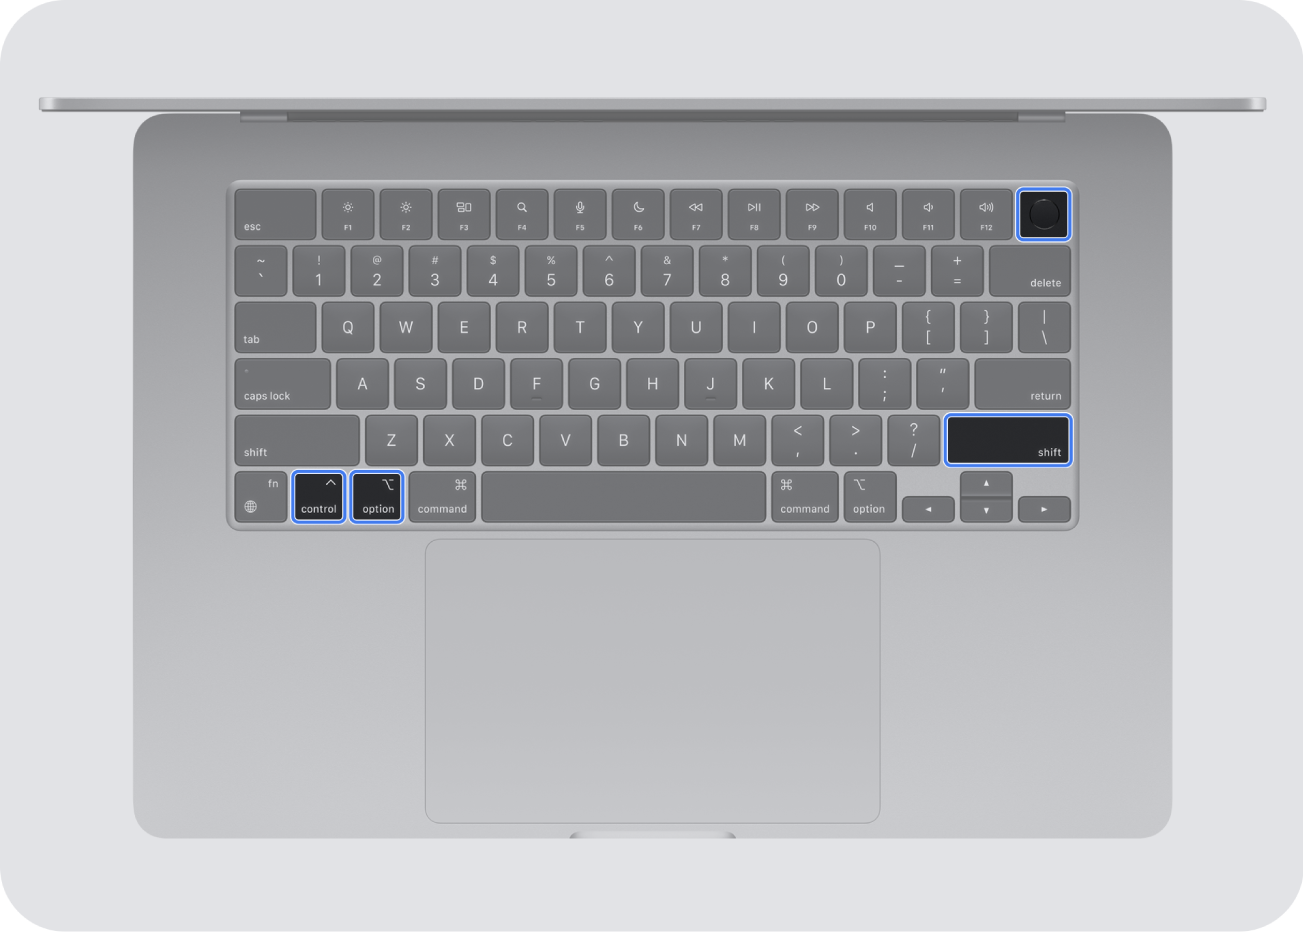 The keyboard of a Mac portable, showing the power button and the following keys: the left Control key, the left Option key, and the right Shift key.